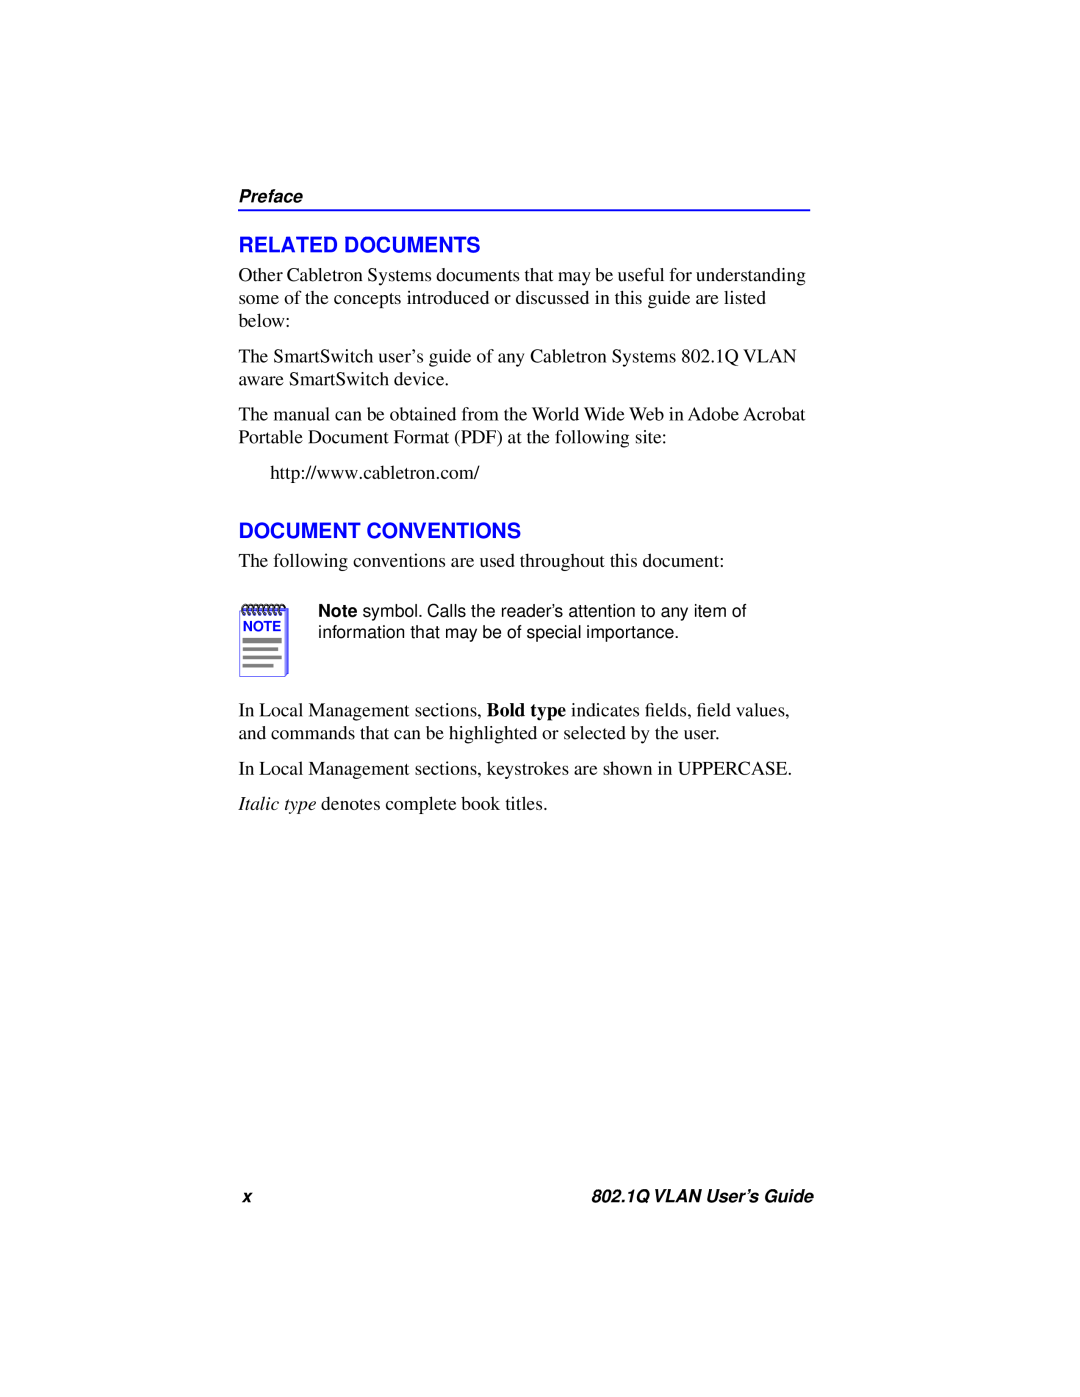 Cabletron Systems 802.1Q manual Related Documents, Document Conventions 